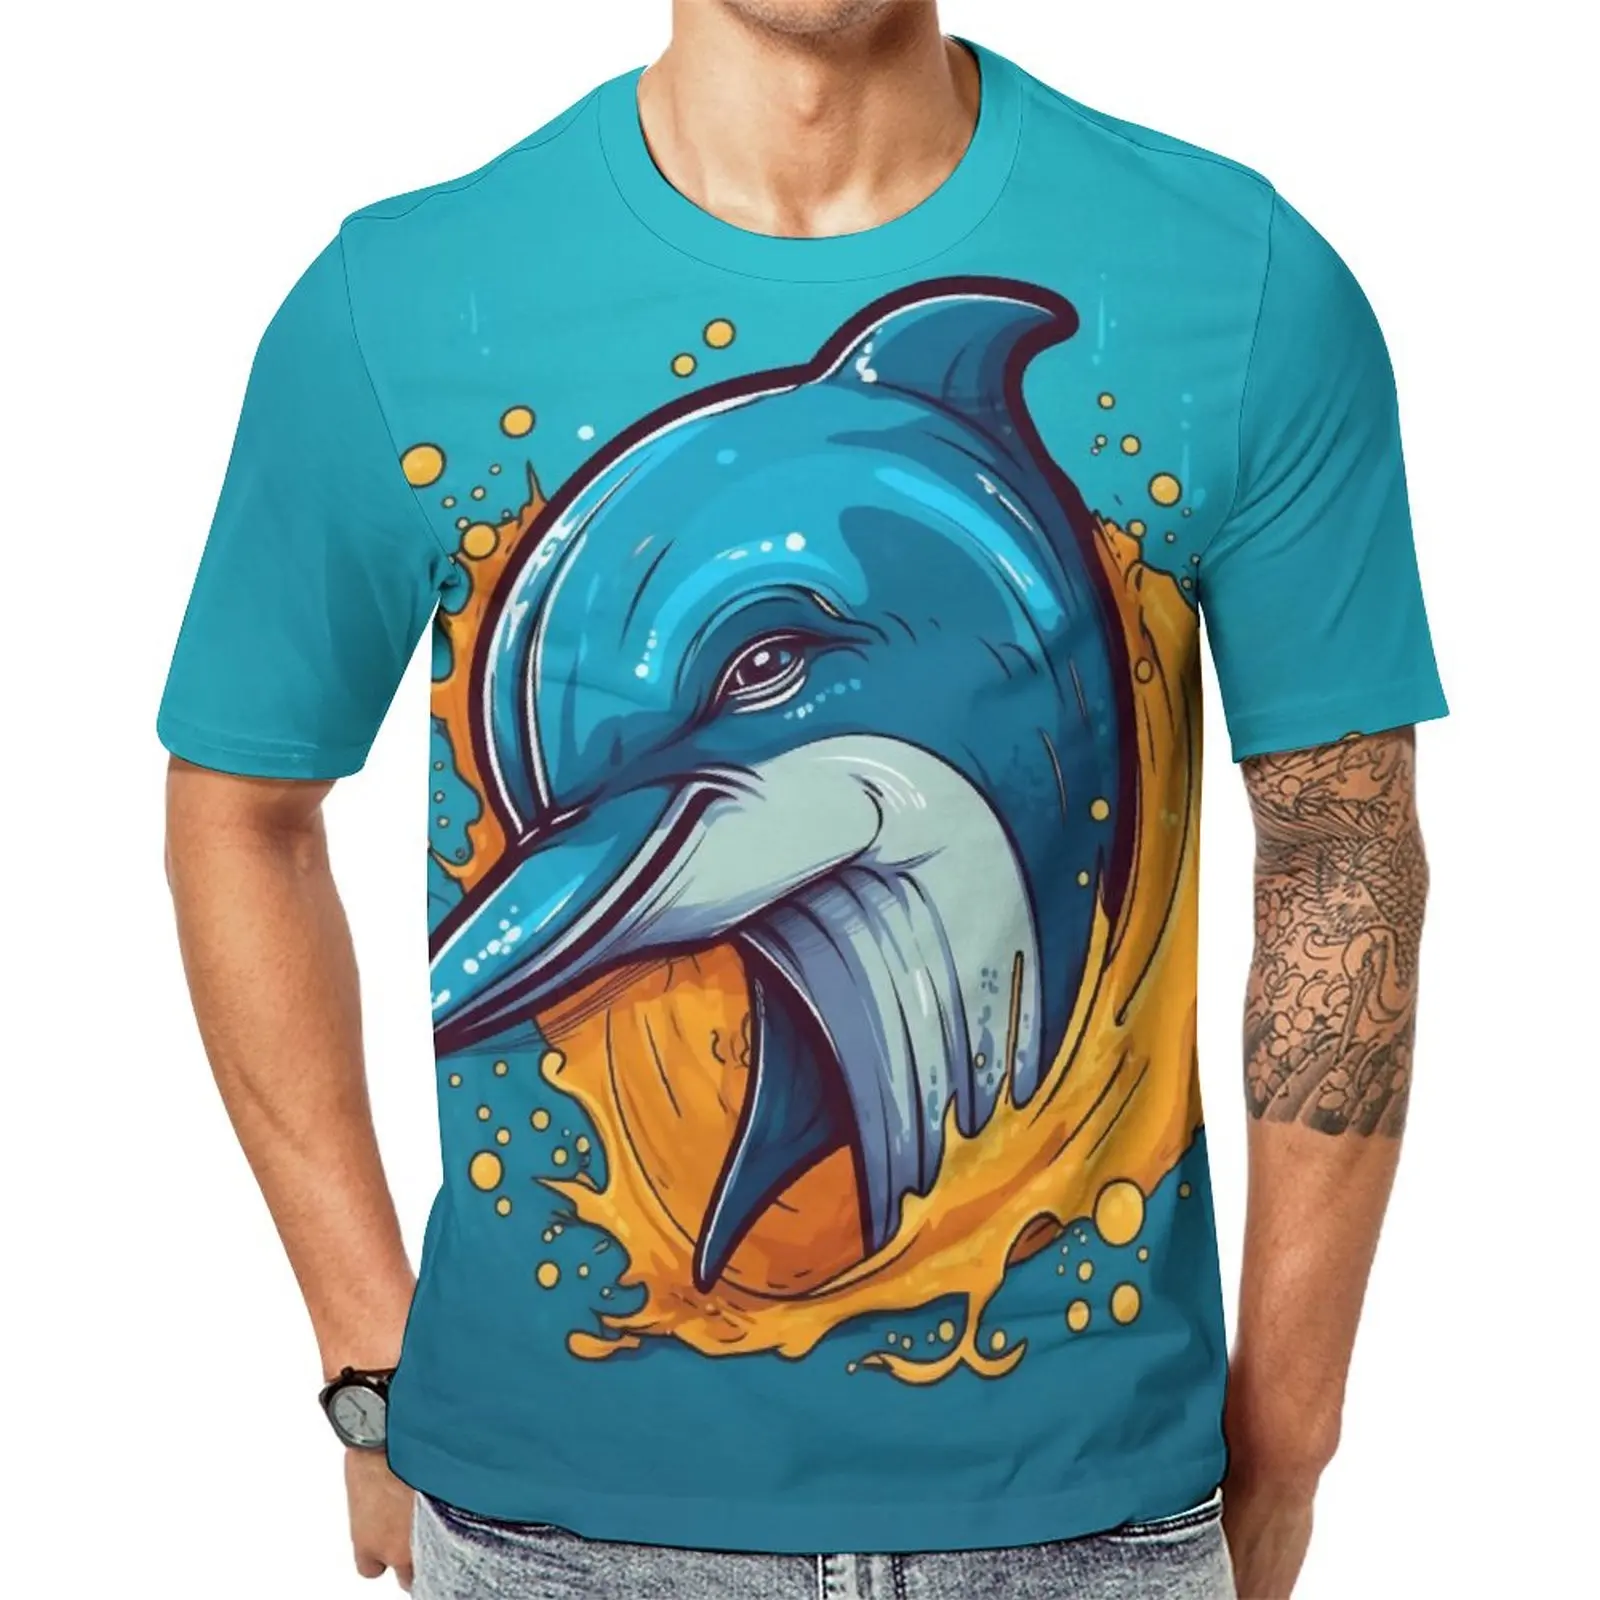 

Dolphin T Shirt Nature Style Funny Cartoon Vintage T-Shirts Short Sleeves Design Tops Cheap Original Kawaii Plus Size Clothes